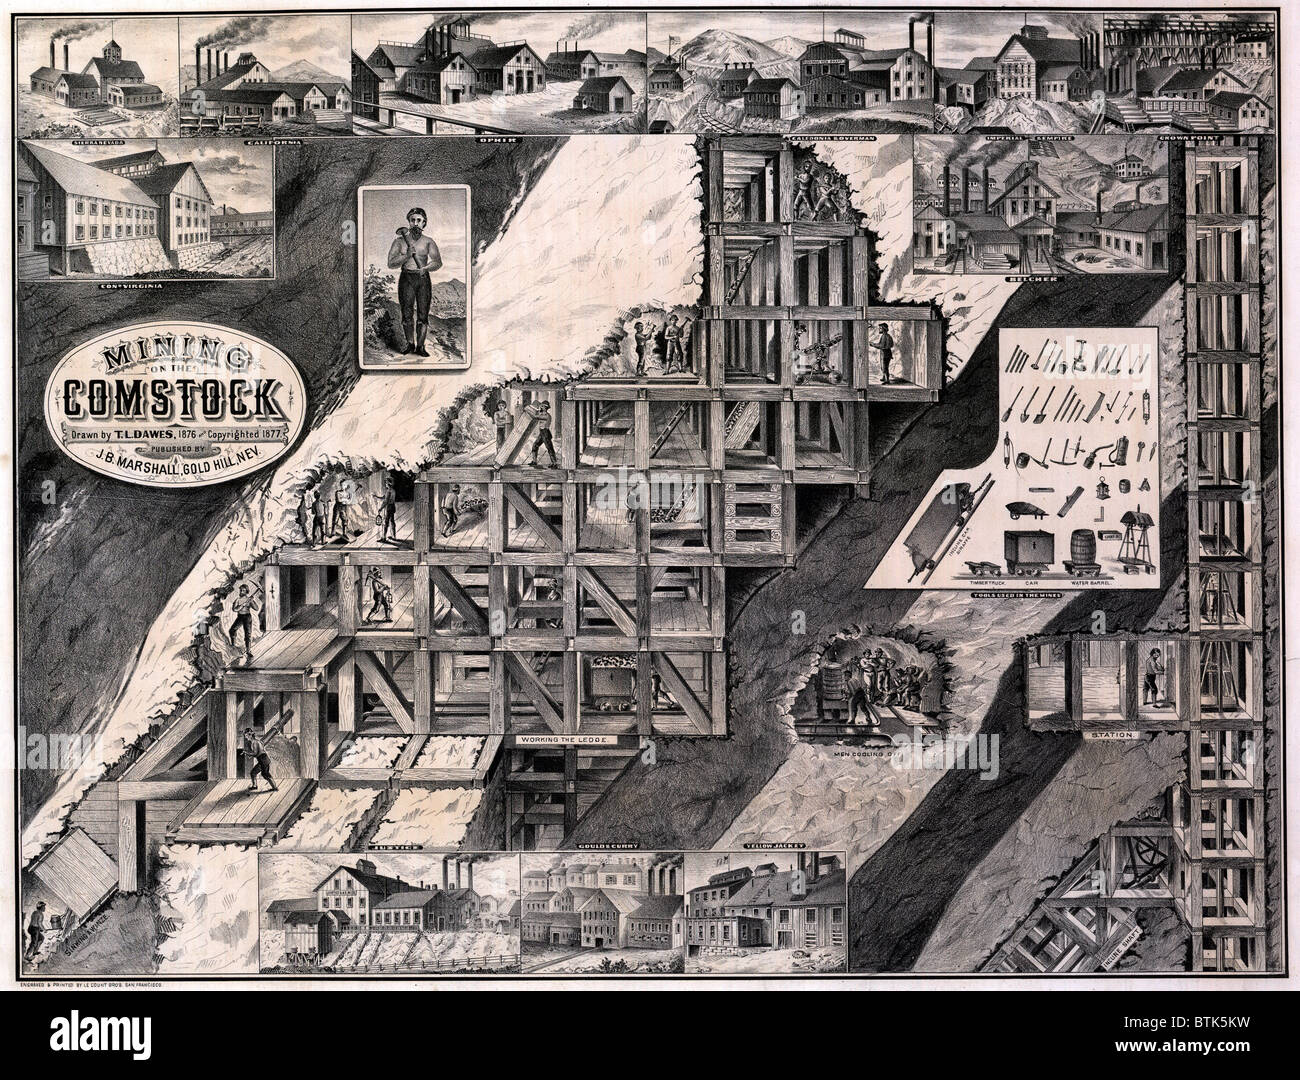 Mining on the Comstock, cutaway of hillside showing tunnels, supports, shafts and miners, as well as exterior views of several mining companies working the Comstock Lode, lithograph by Le Count Bro's, 1876 Stock Photo